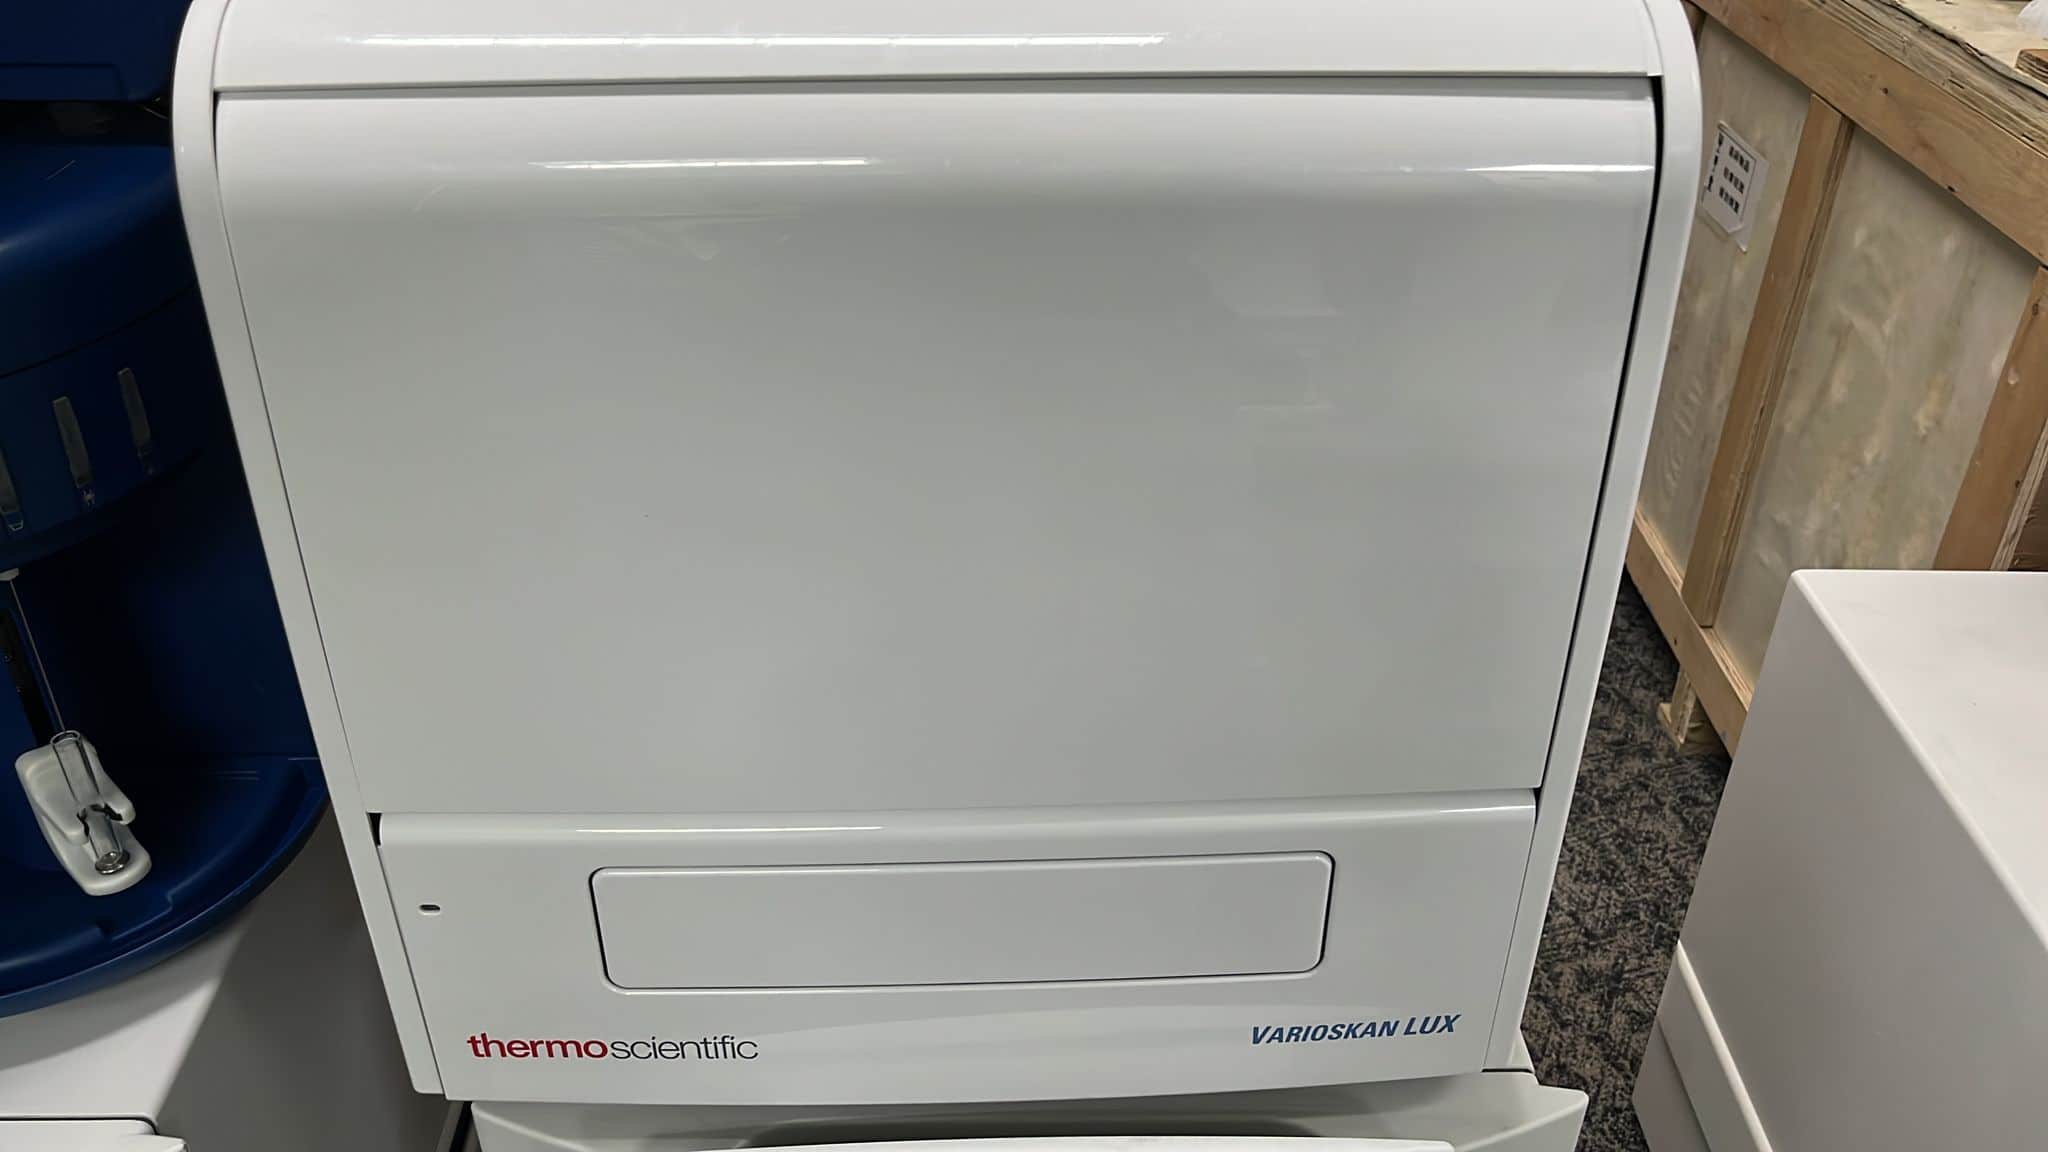 thermo scientific varioskan lux Multimode Microplate Reader